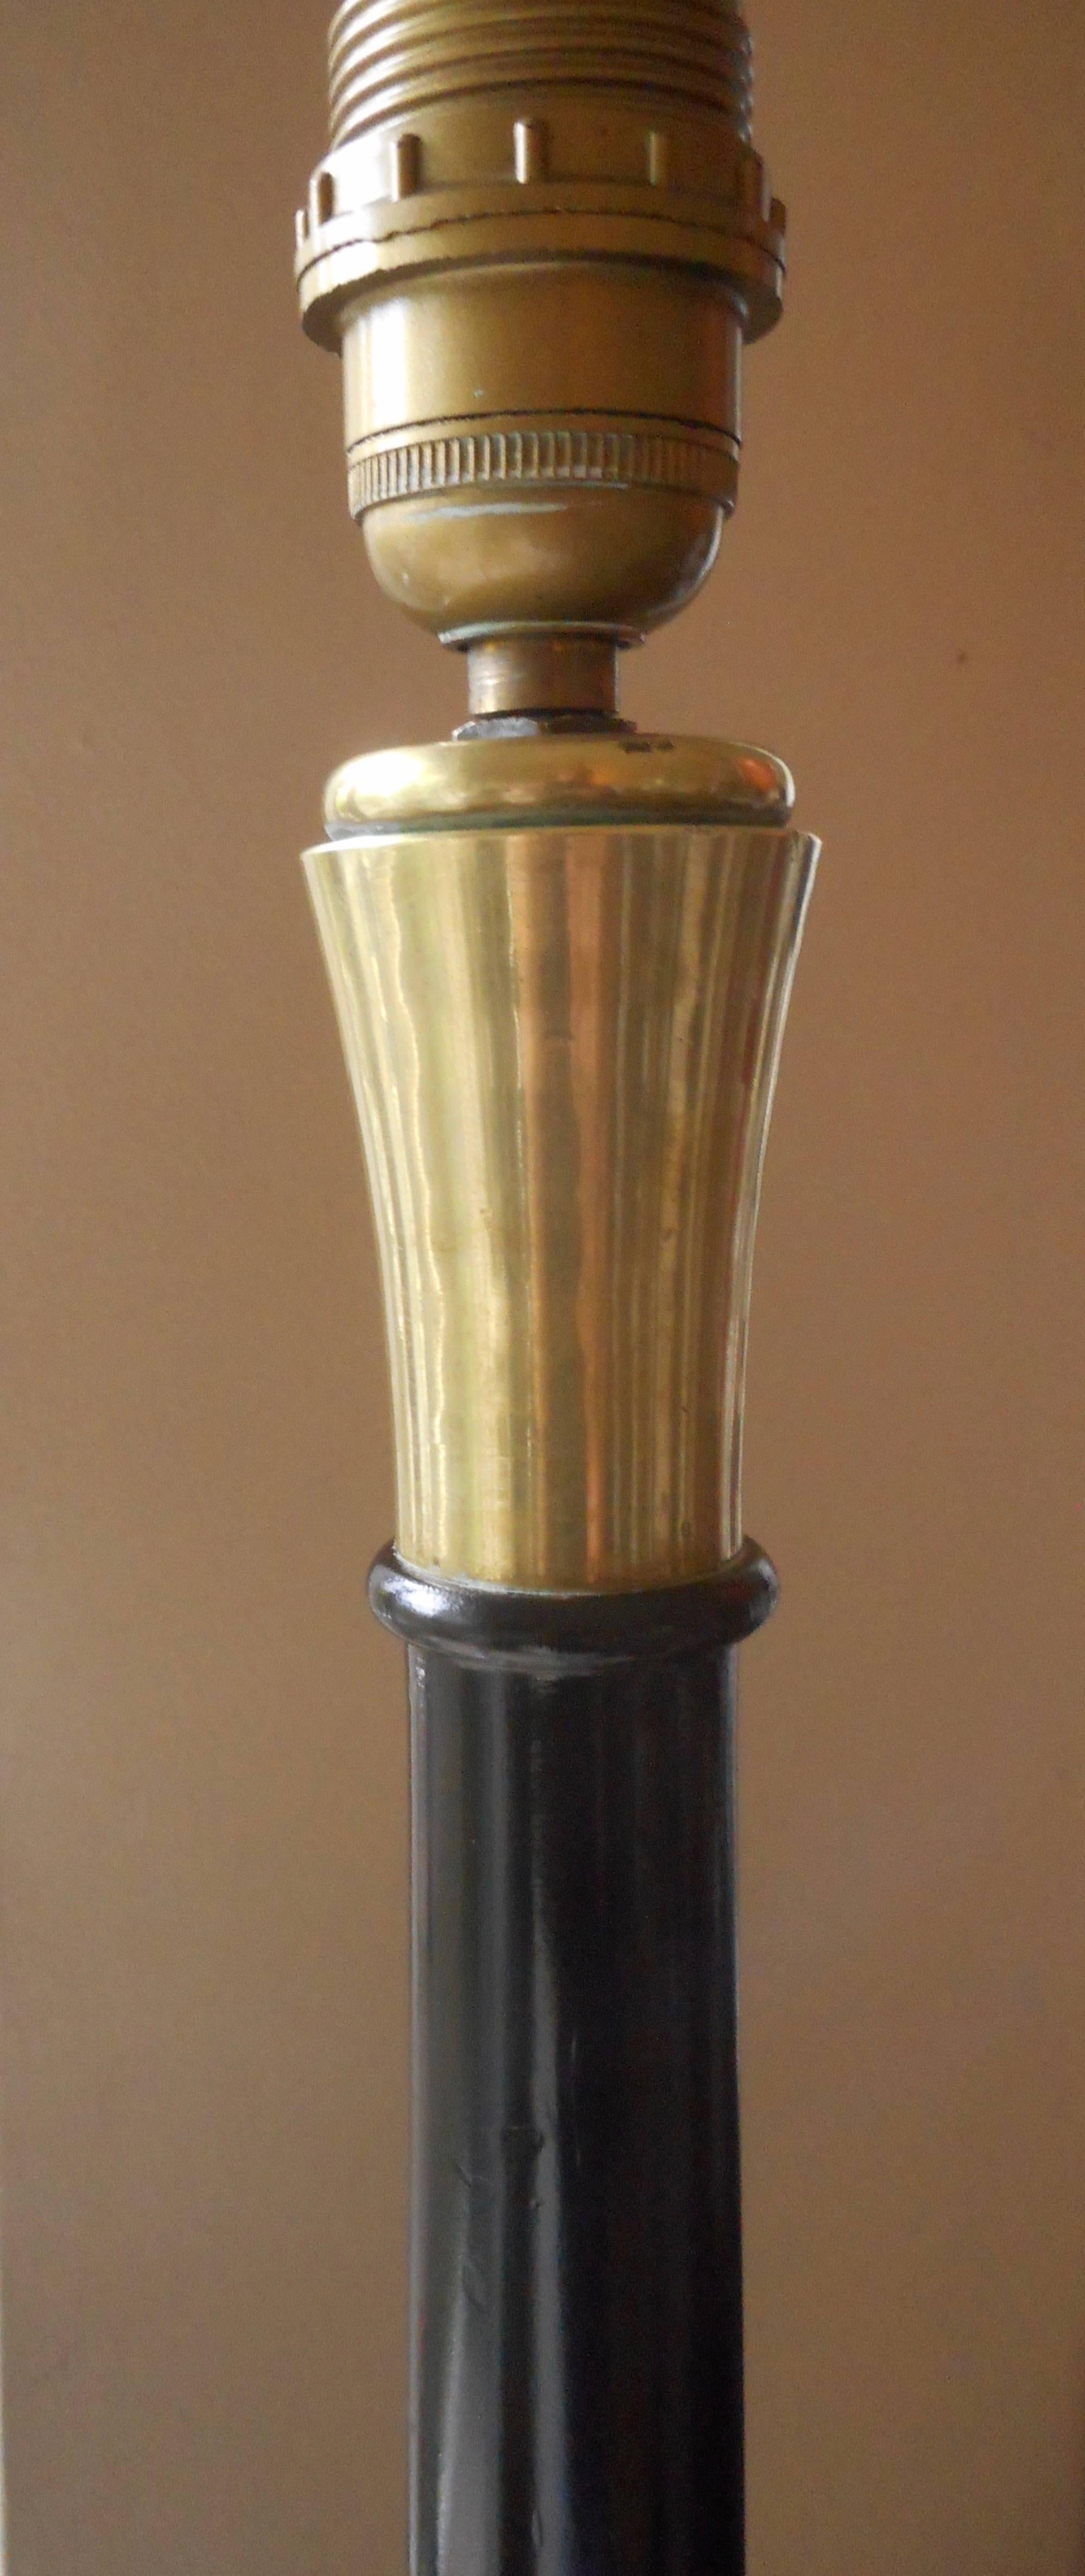 Back lacquered wood with gilt bronze accents.
Circular base with bronze rings.
One light,
circa 1930.